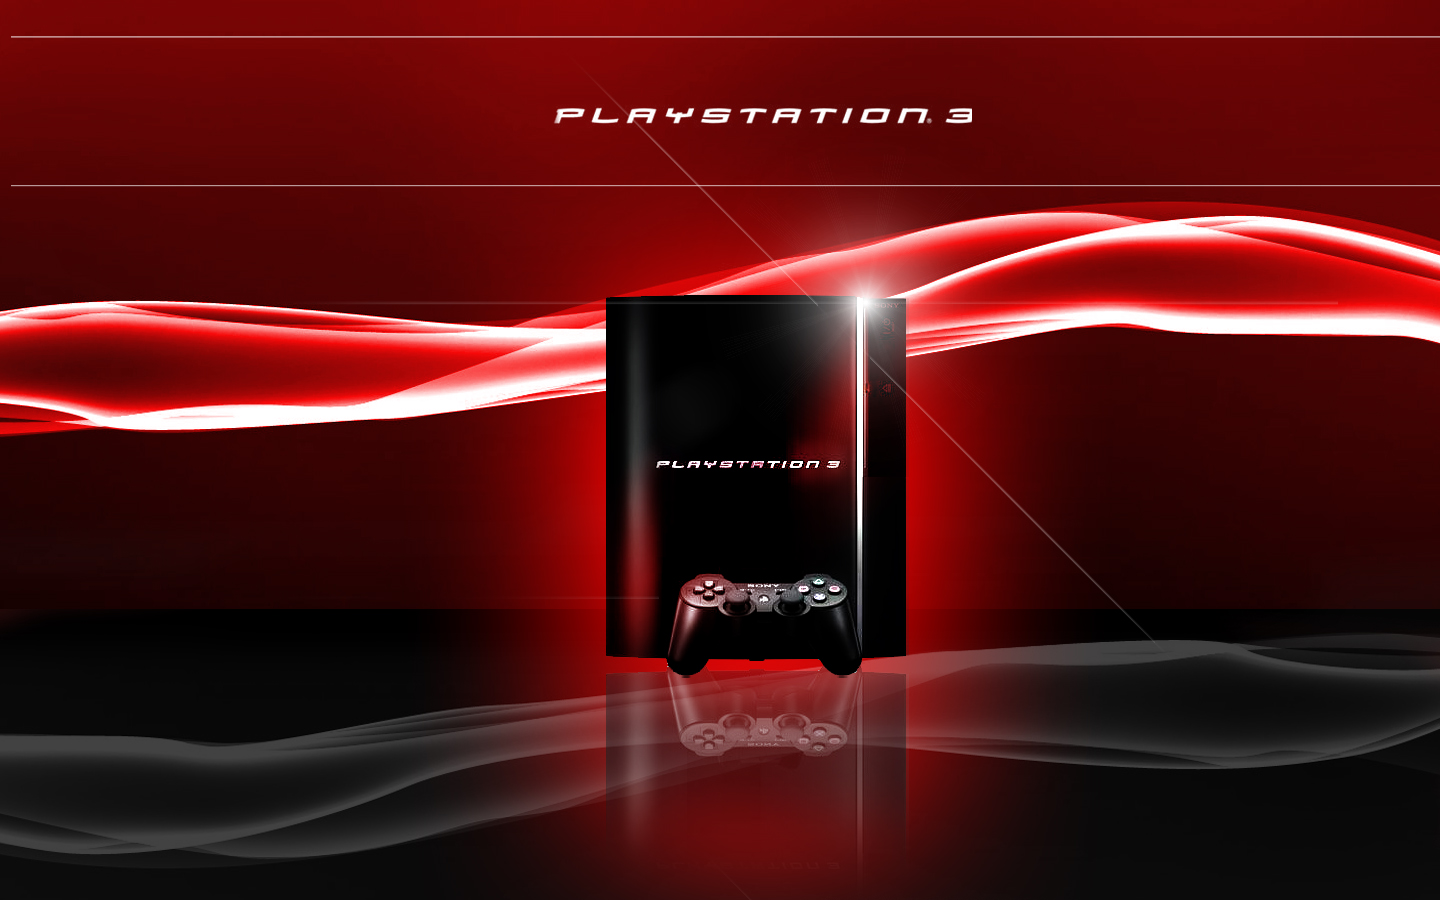 Playstation 3 Wallpaper by Zero1122 on